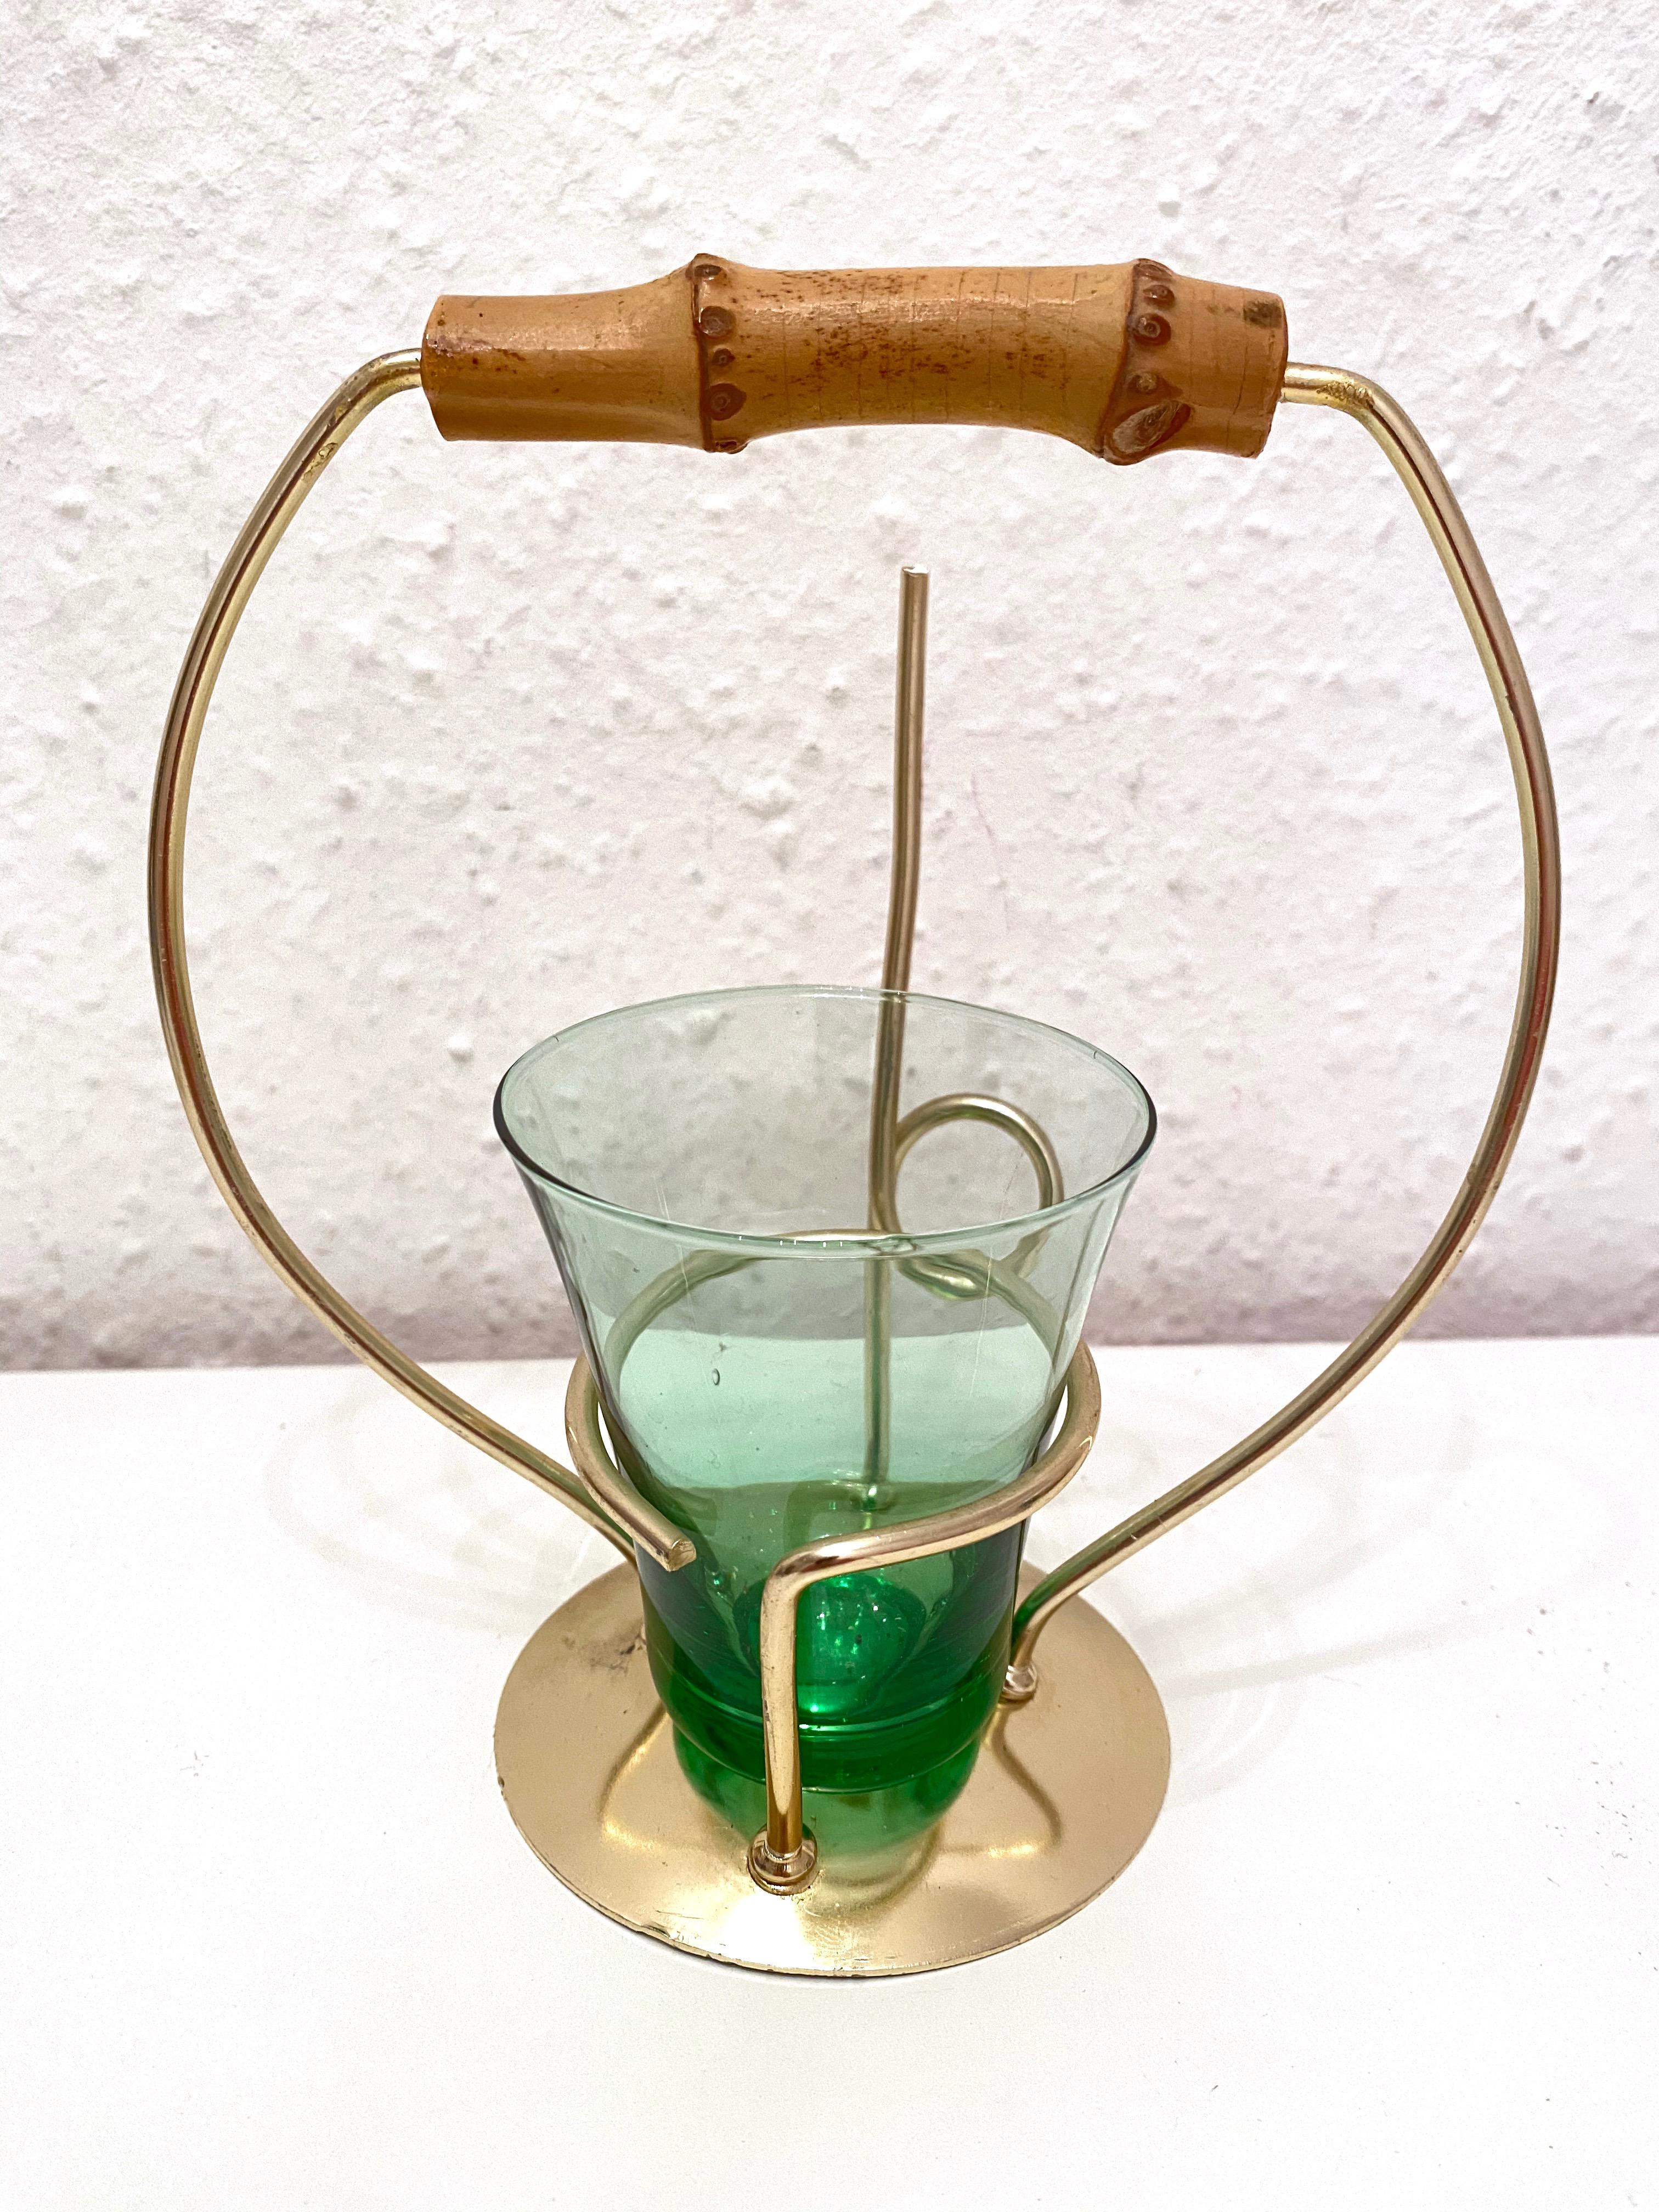 This lovely piece is typical 1950s. The glass is for salt sticks or nuts and the golden metal stand is for pretzels.
The handle is made of bamboo. The glass is green and the metal holder is in gold. The set is in very good condition.
There are no